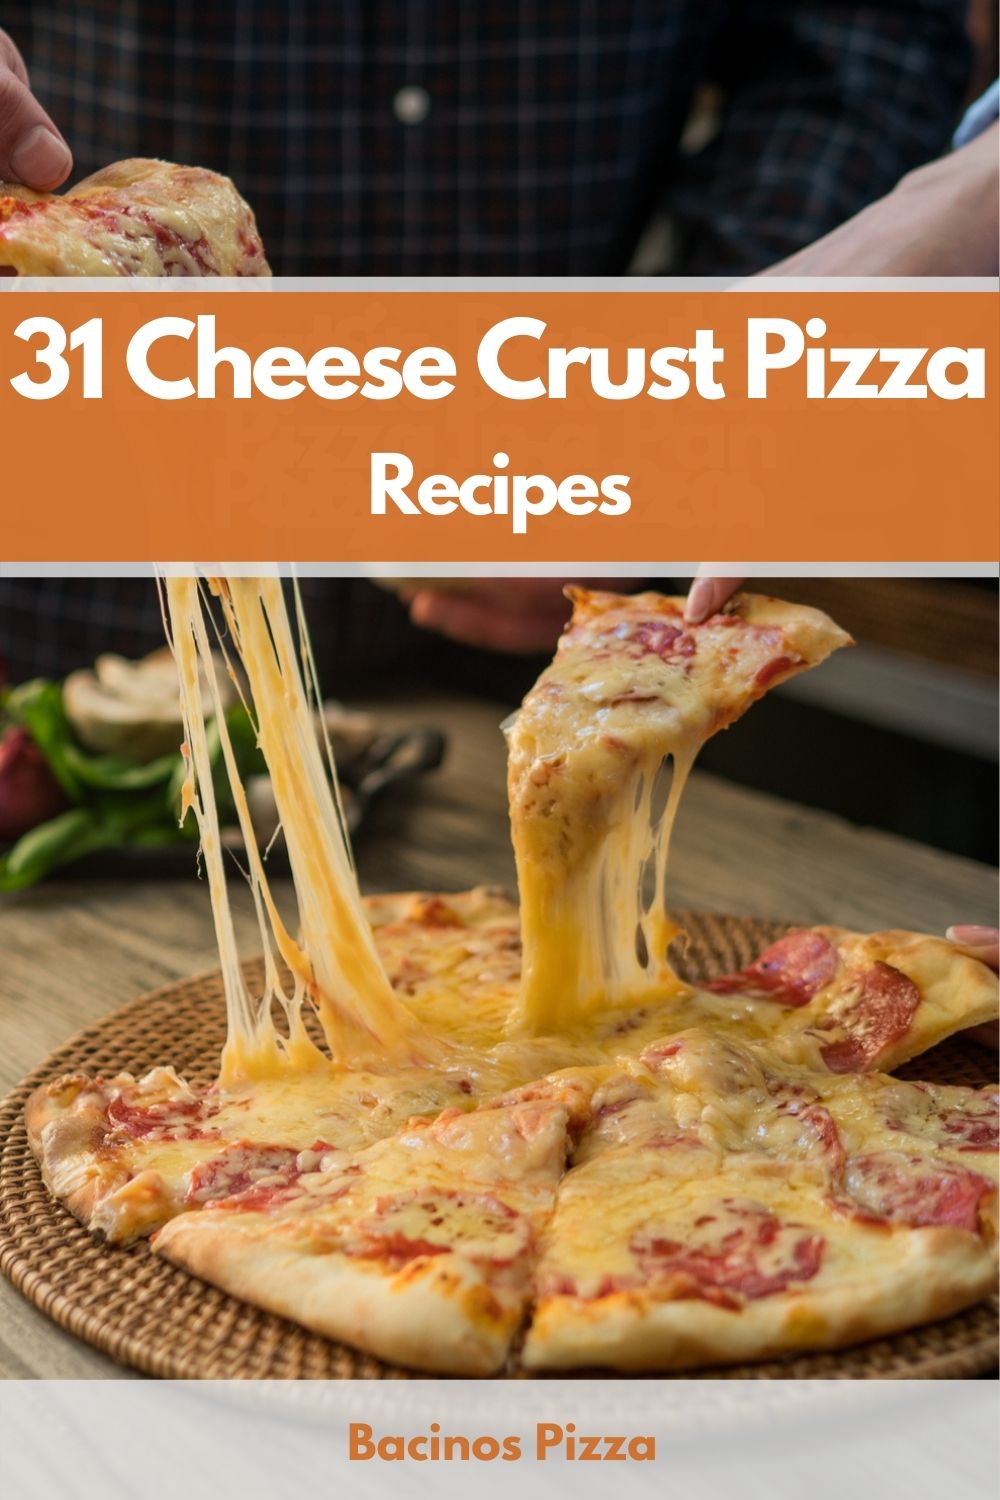 31 Cheese Crust Pizza Recipes pin